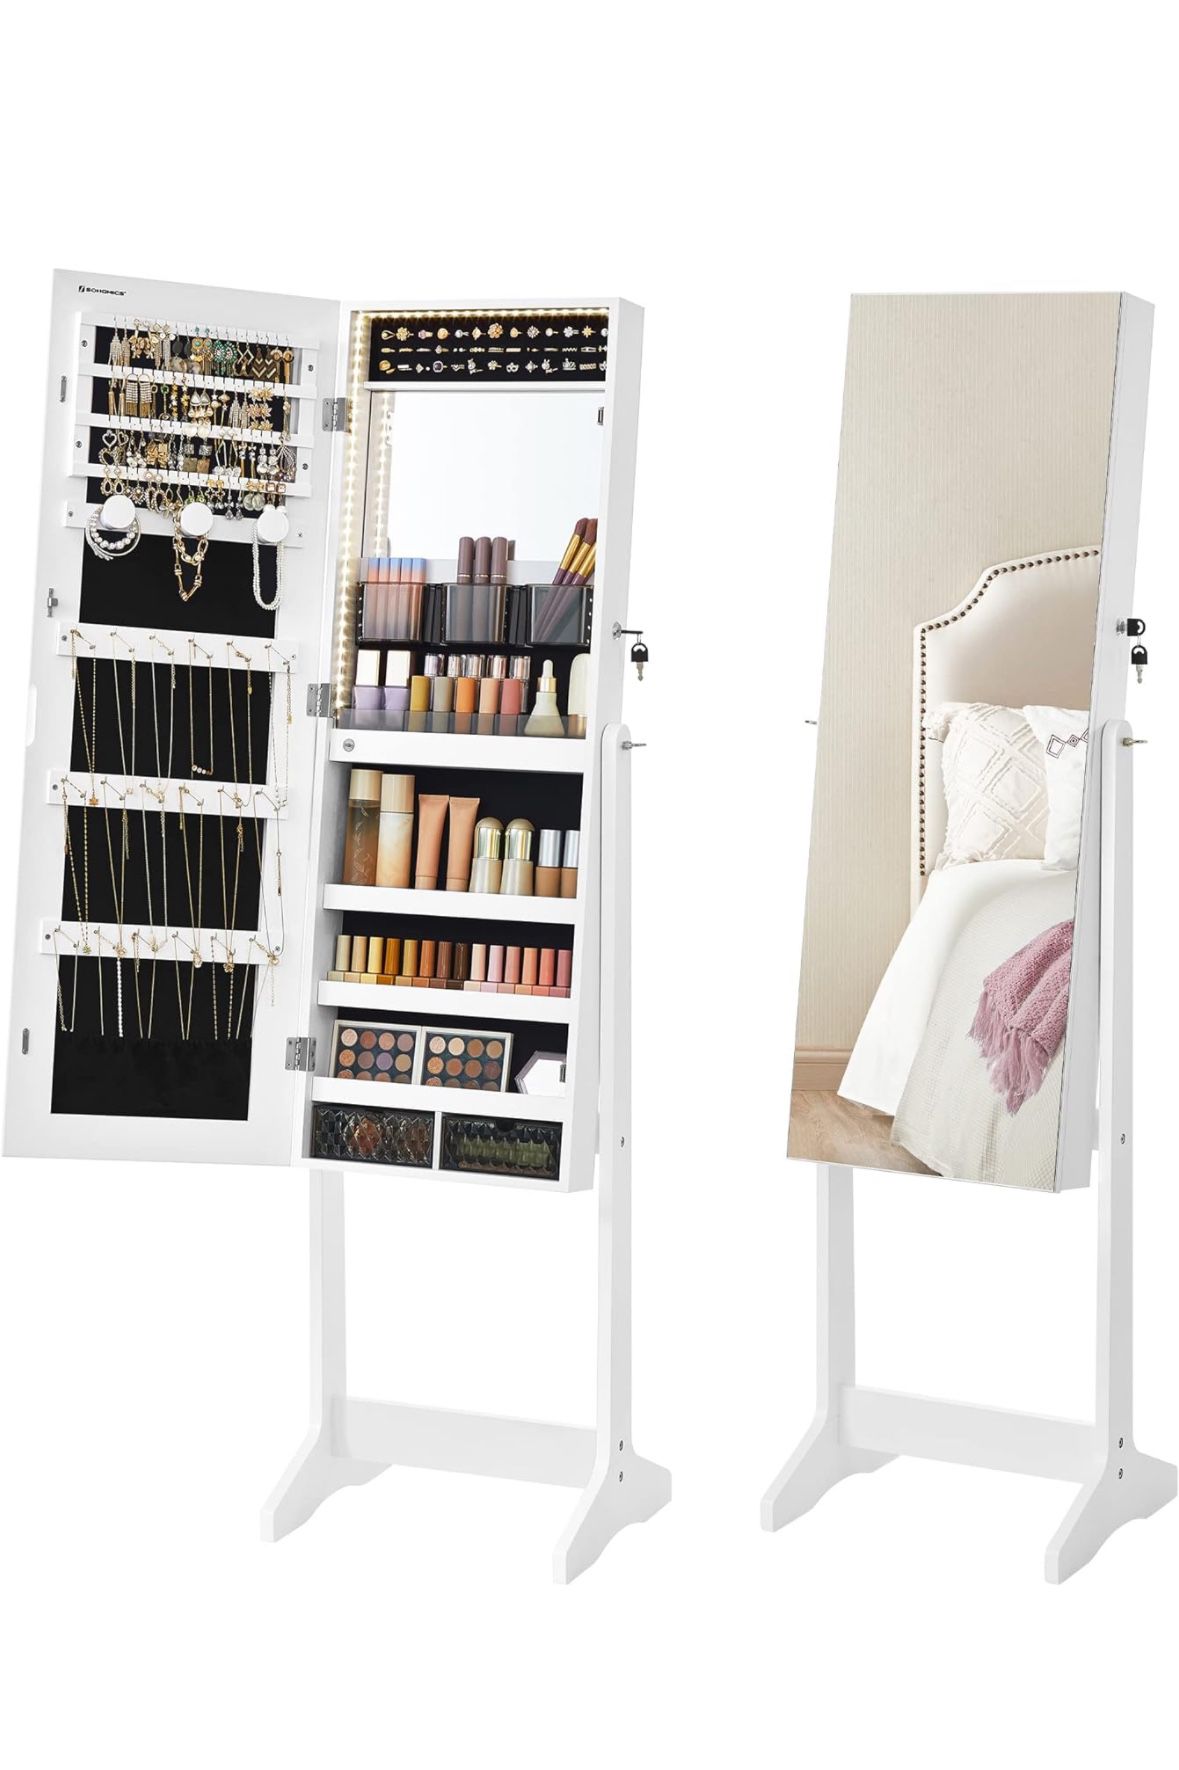 Mirror Jewelry Cabinet Standing Armoire Organizer, Jewelry Storage with Full-Length Frameless LED Lights, Built-in Makeup Mirror, 2 Drawers